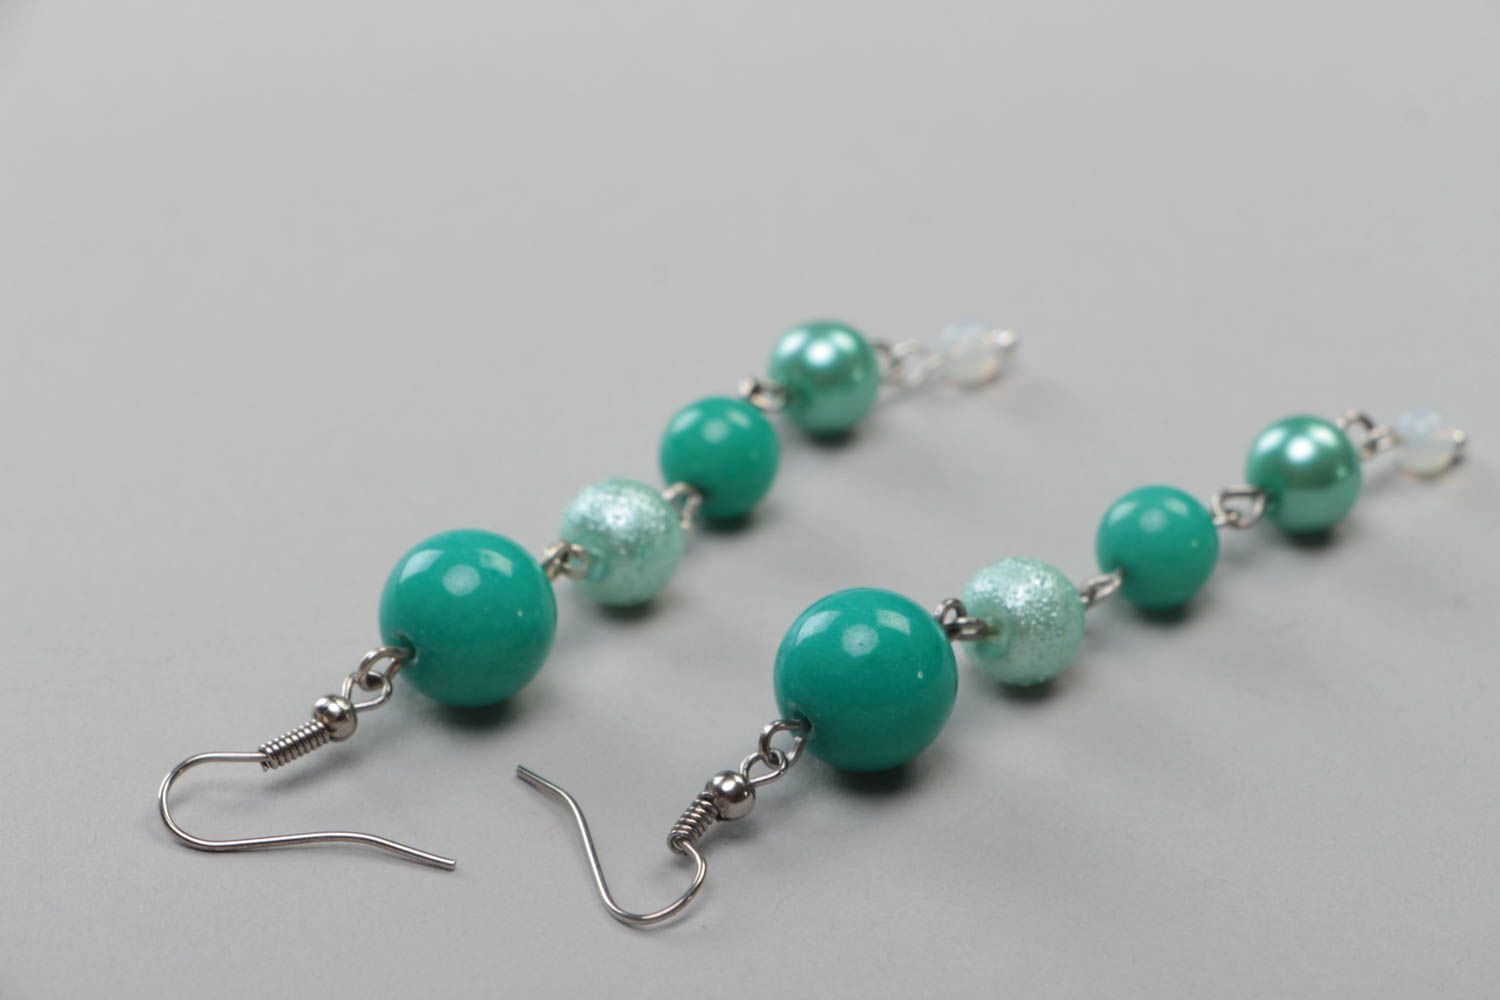 Handmade designer earrings long green accessories jewelry made of natural stones photo 4